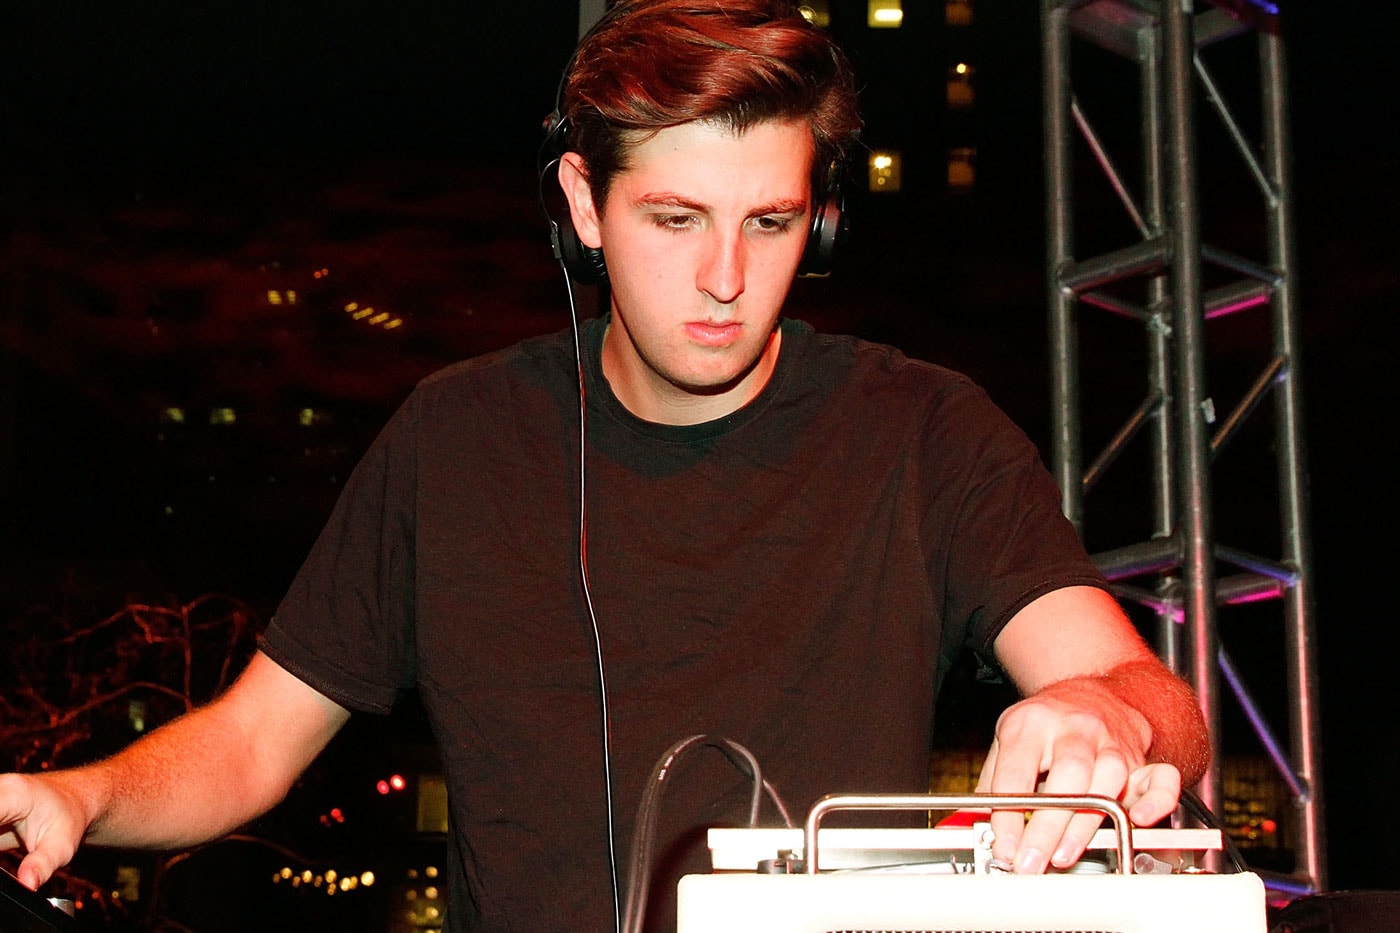 Watch Jamie xx Perform Remix of "I Know There's Gonna Be (Good Times)" With Kranium & Assassin